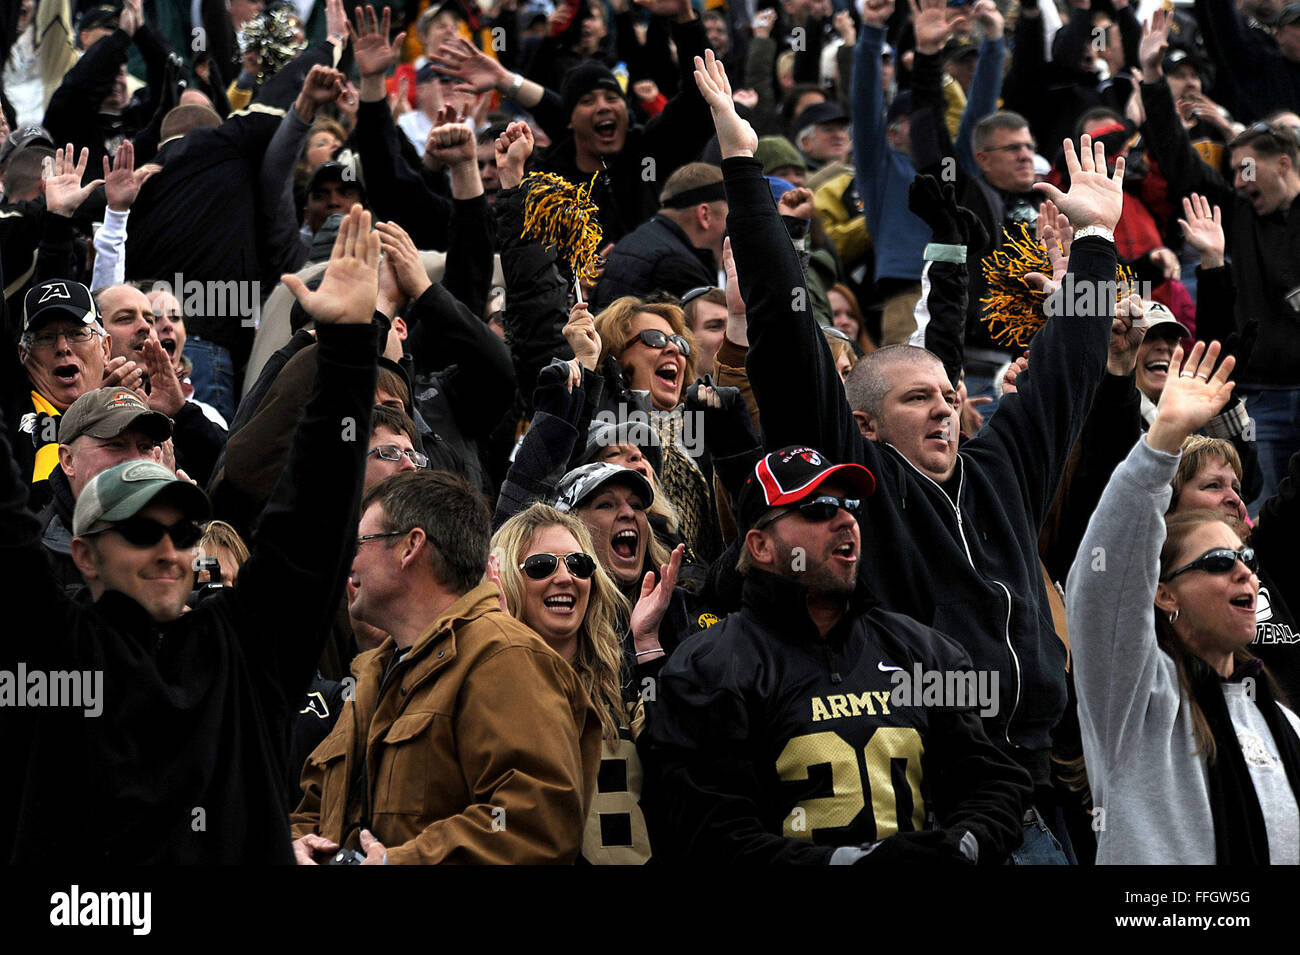 U.S. Military Academy at West Point football fans cheer after their team scores a touchdown during the Nov. 5 game. Army was leading by 14-0 going into halftime. Stock Photo